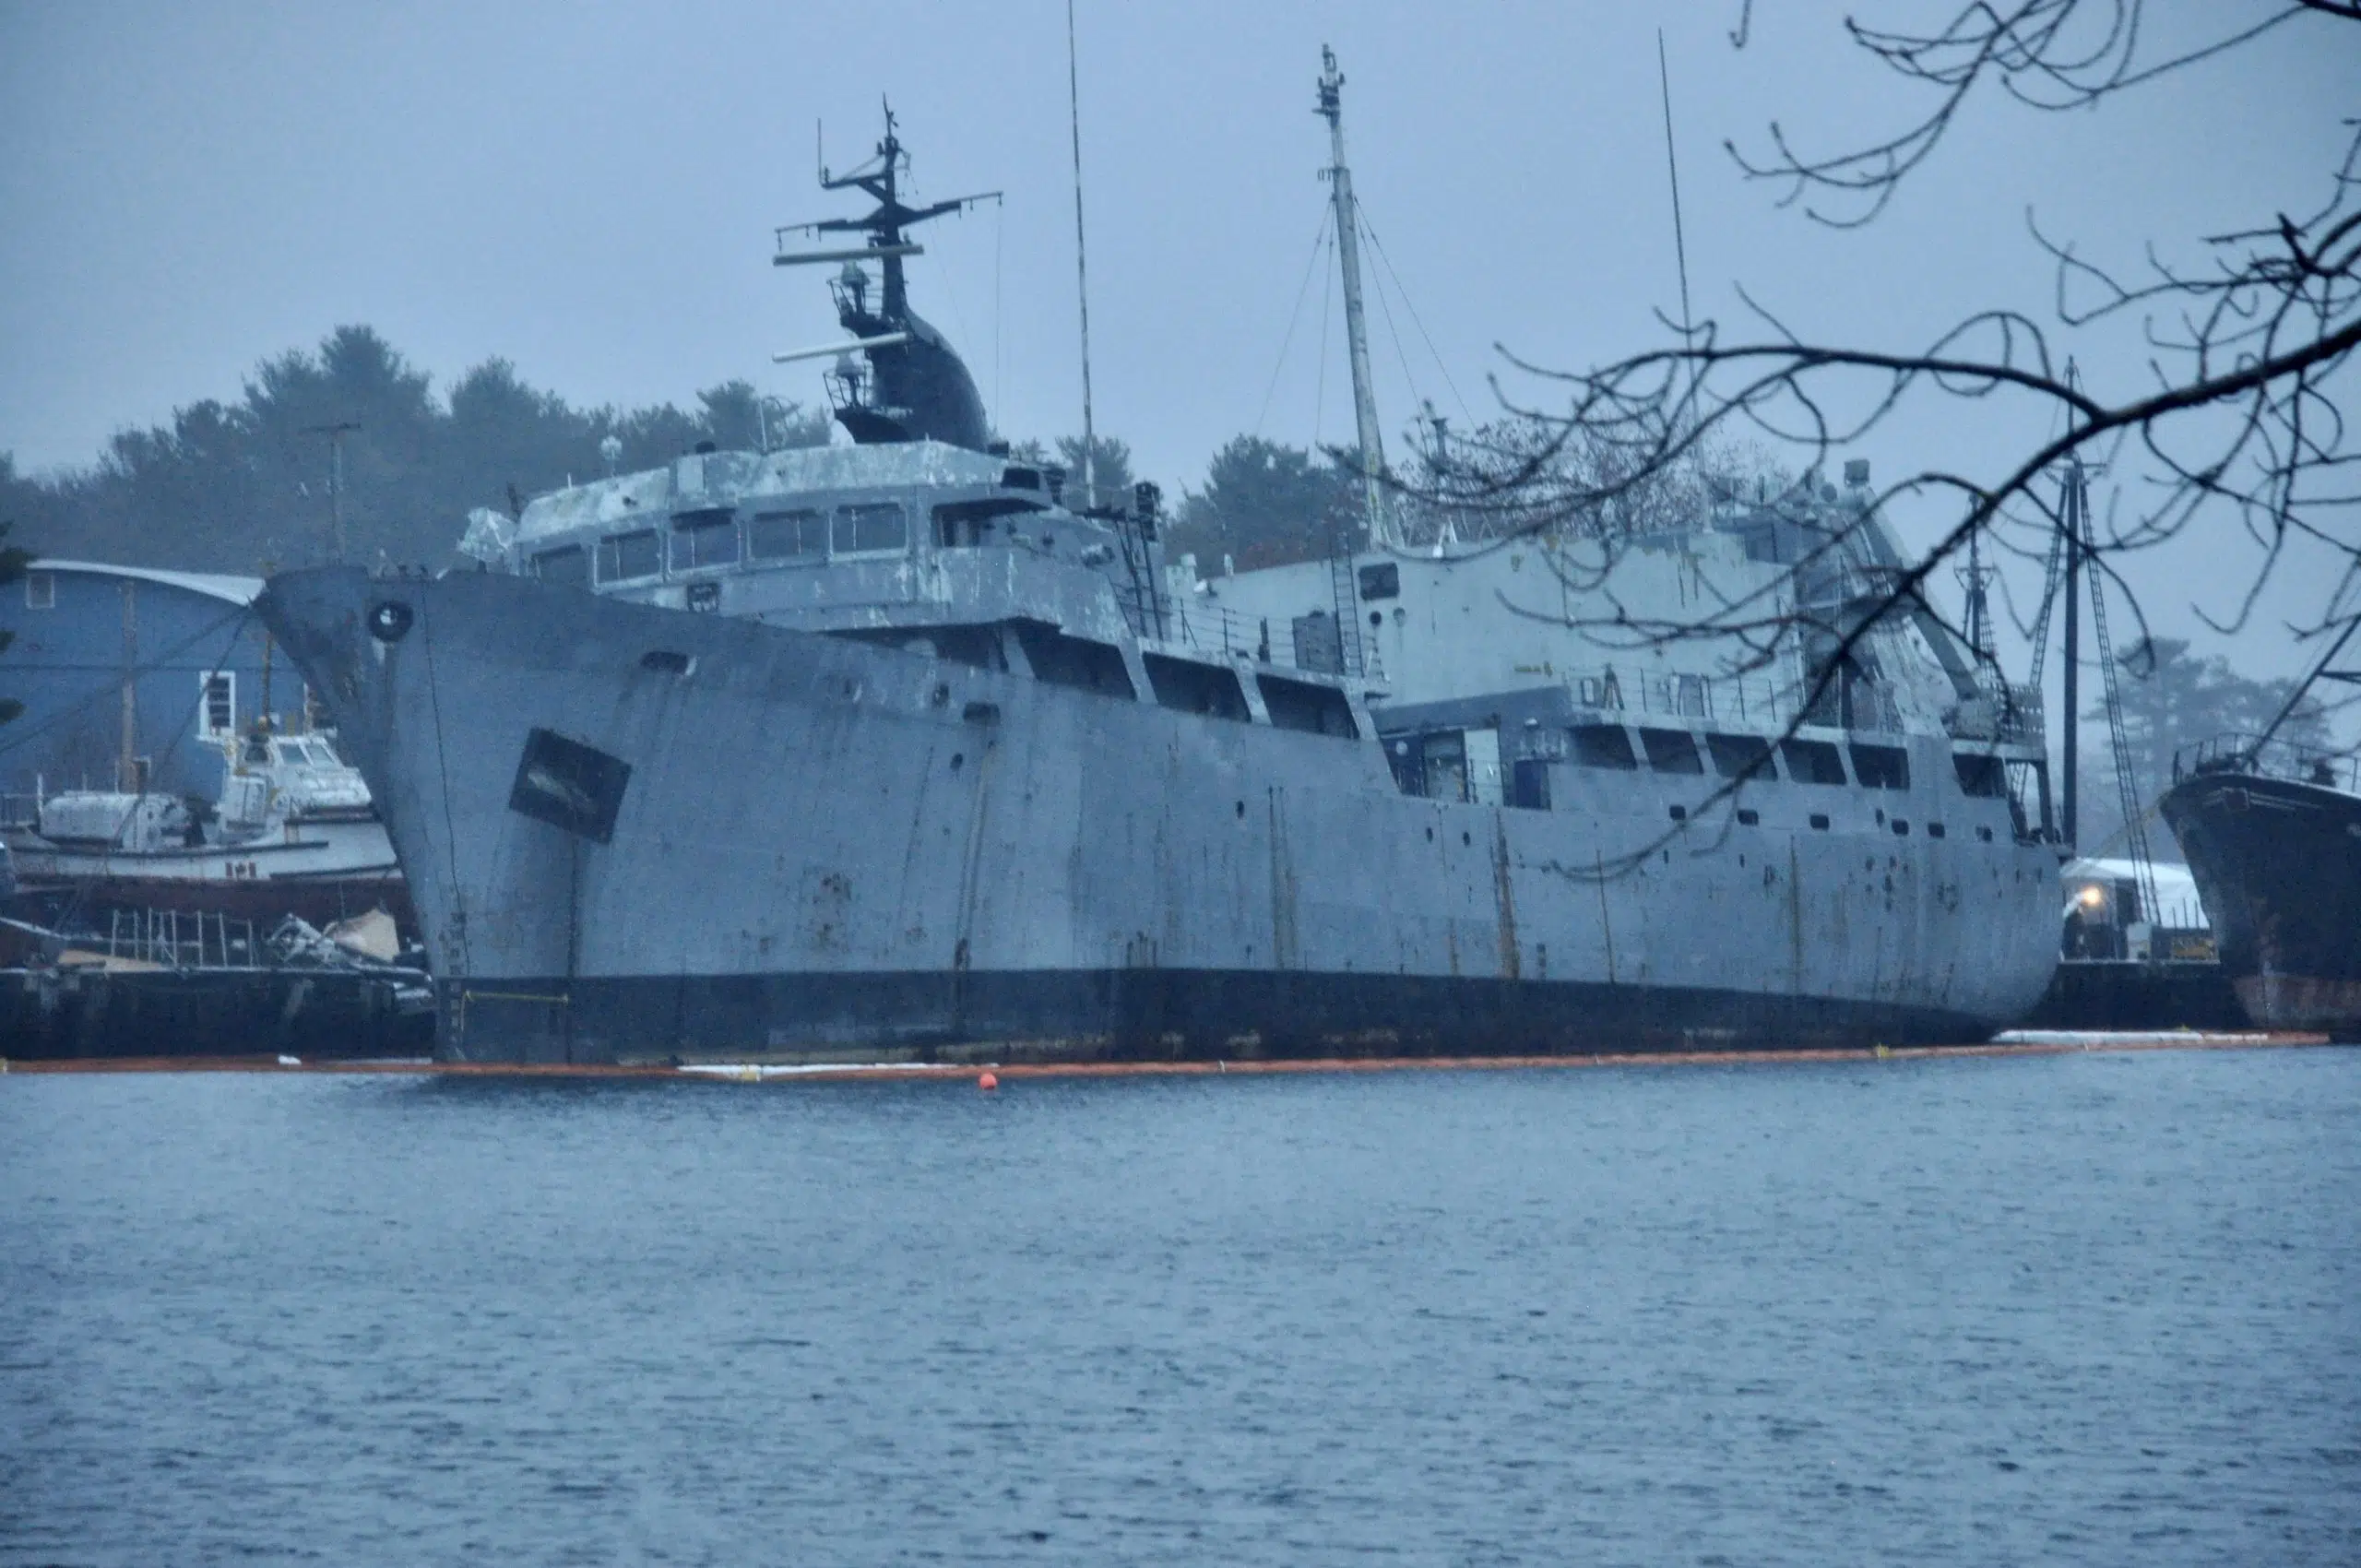 Naval Ship Long Abandoned In LaHave River Deemed A Pollution Threat